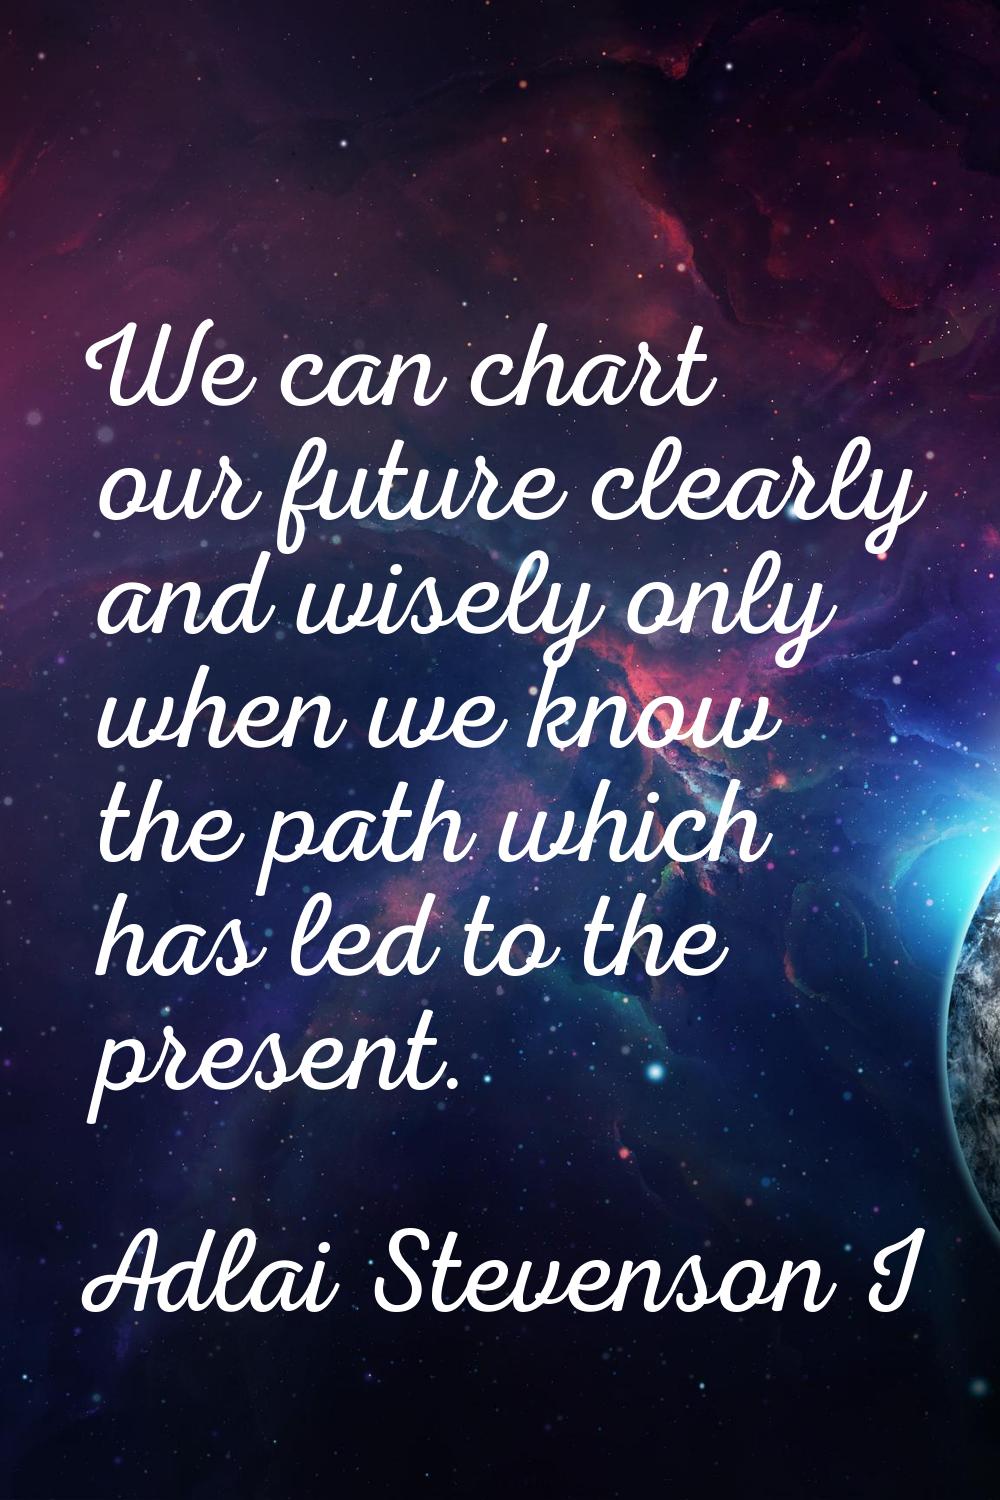 We can chart our future clearly and wisely only when we know the path which has led to the present.